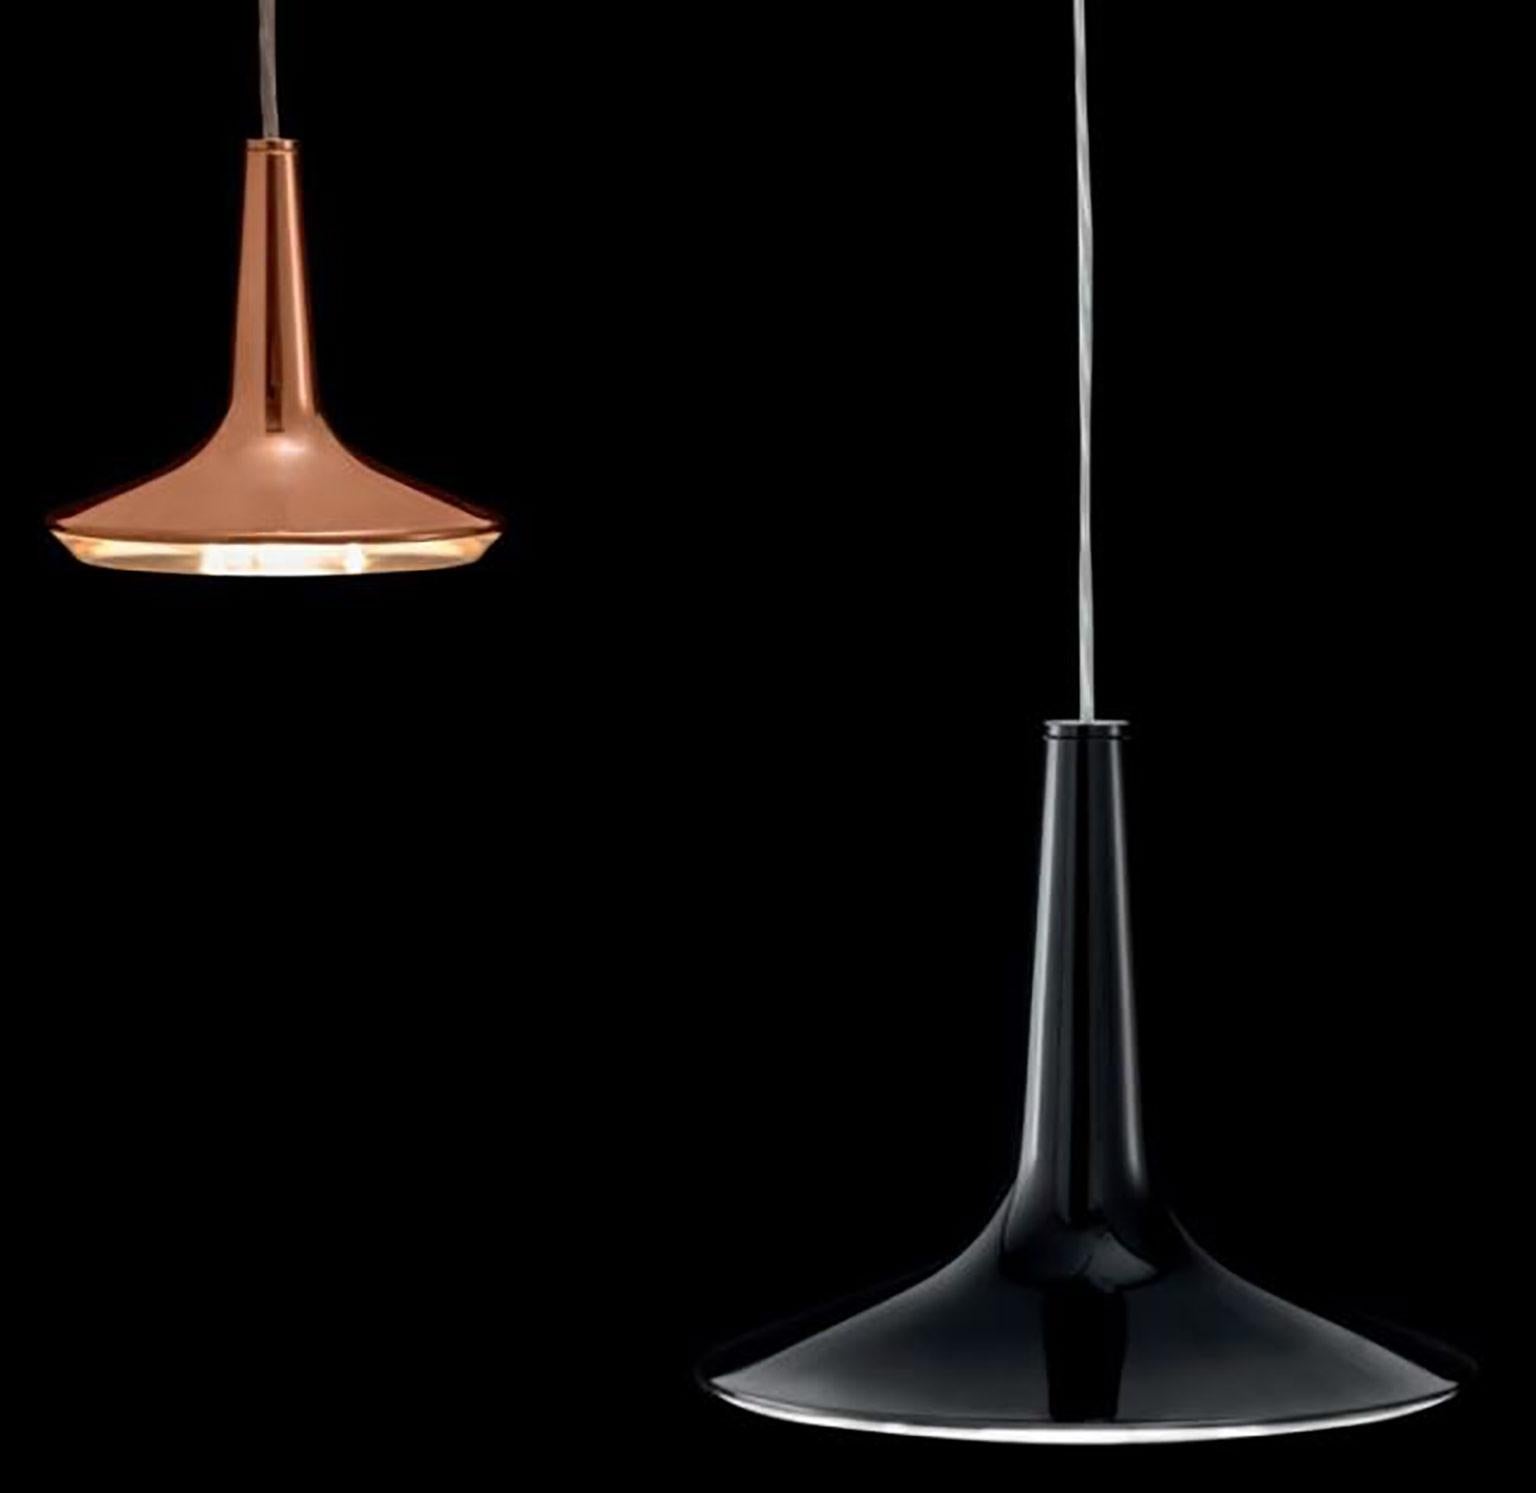 Kin suspension lamp by Francesco Rota for Oluce. This lamp is made from cast aluminium with an LED core. The flared shape is closed with a methacrylate disc functioning as the diffuser. The LED light source reflects the light downwards through this